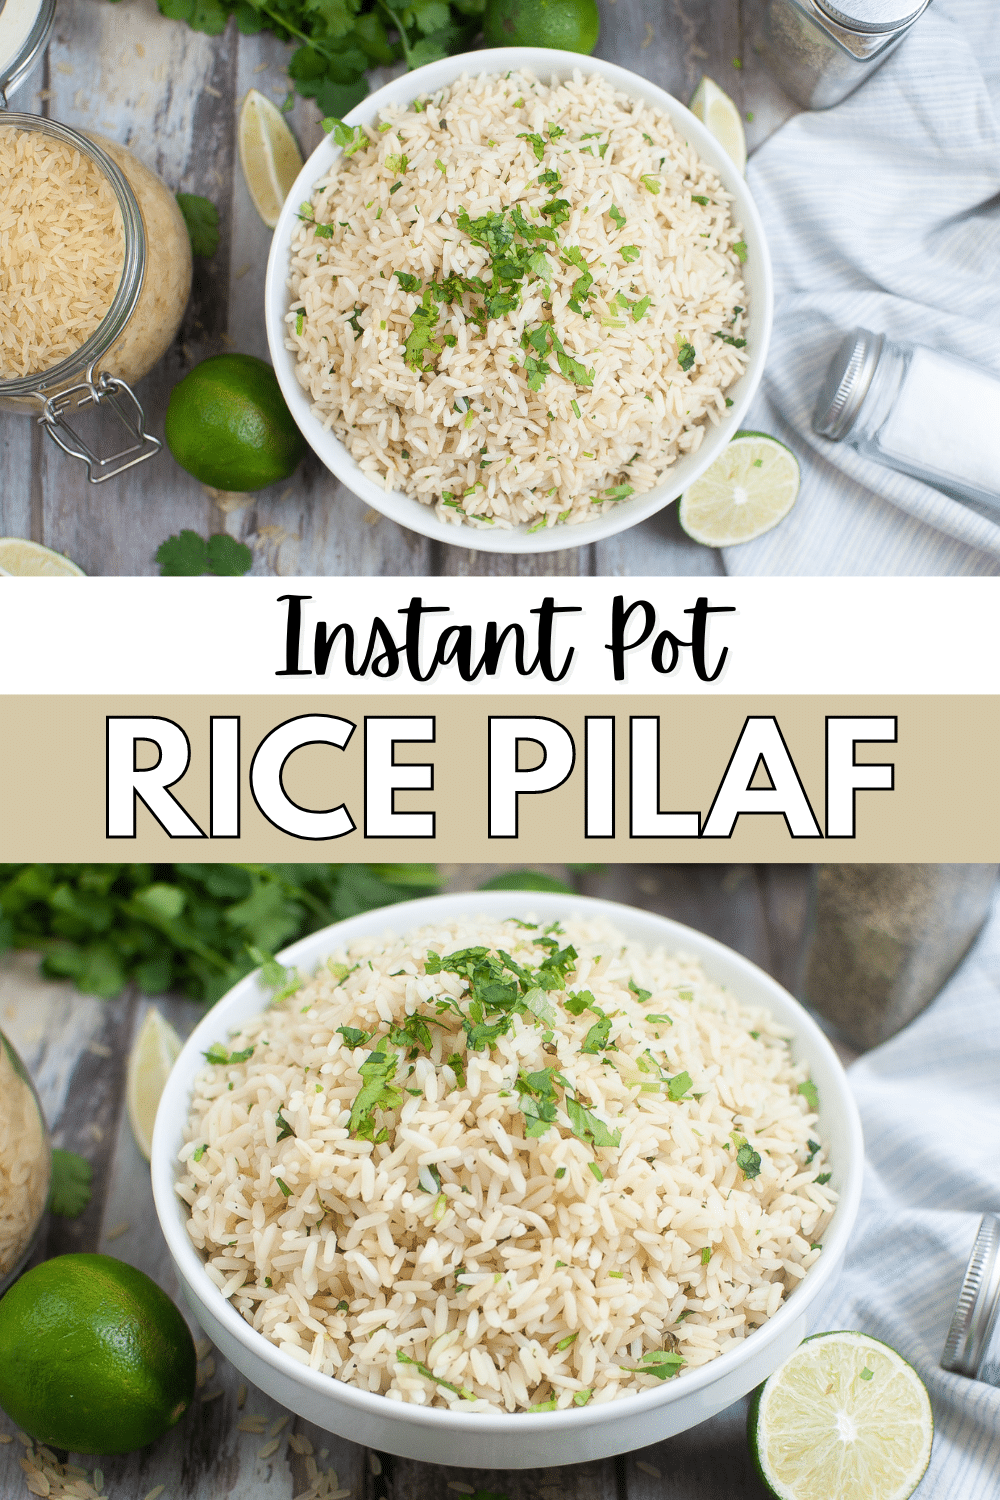 Pilaf made quickly in the Instant Pot.